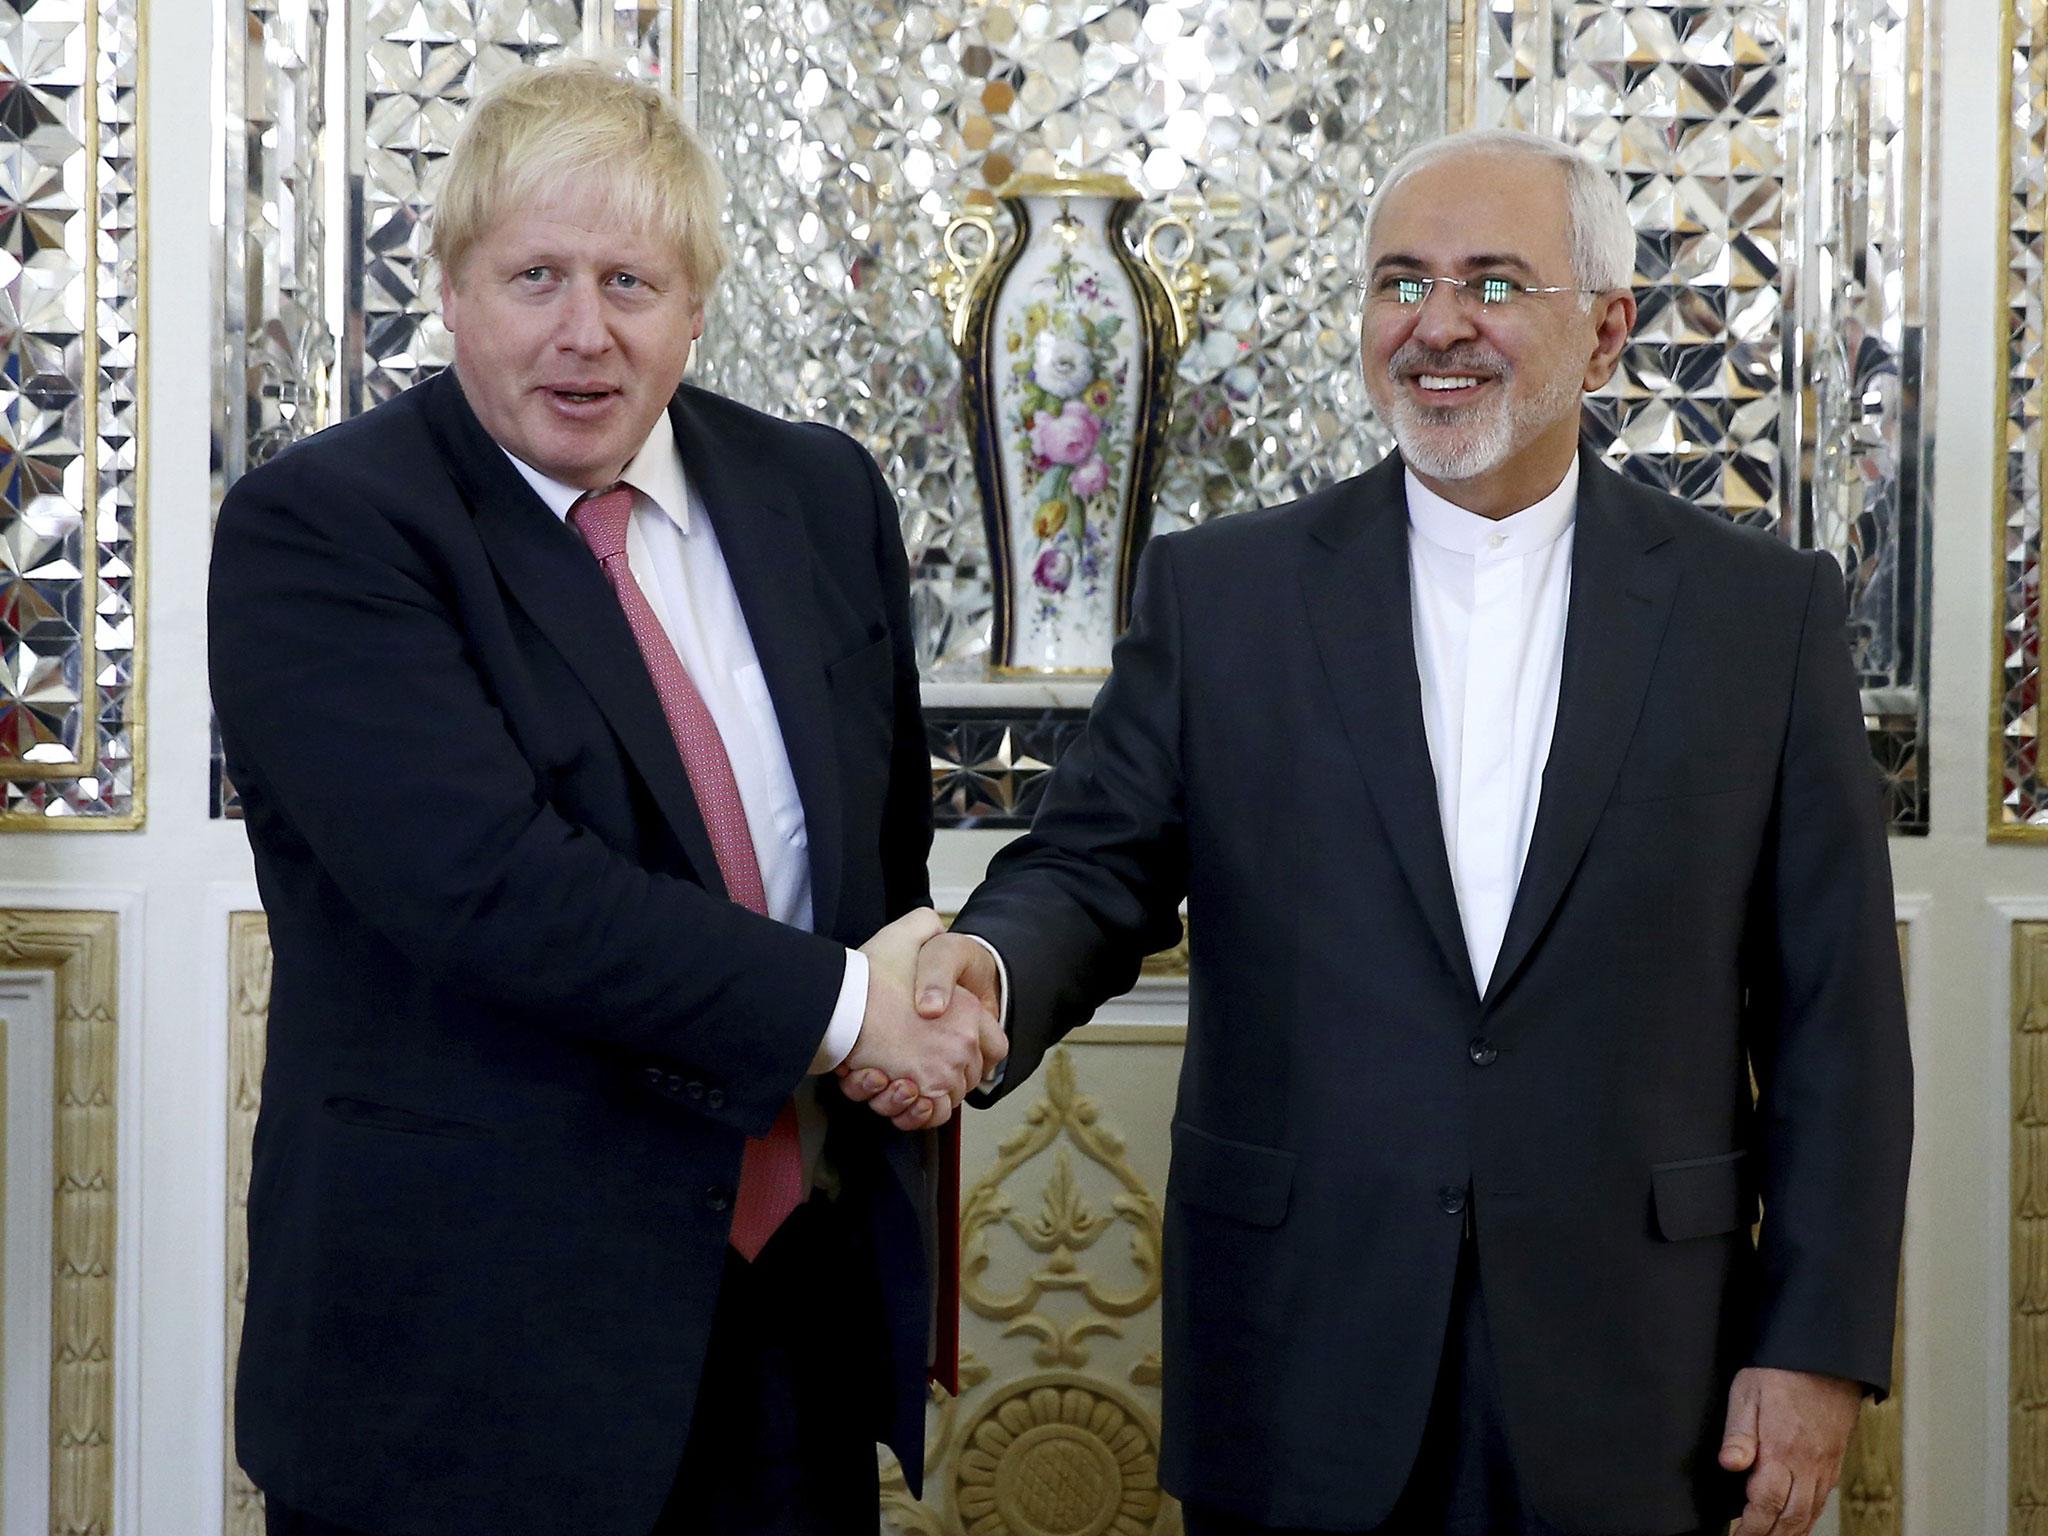 Iranian Foreign Minister Mohammad Javad Zarif, right, and his British counterpart Boris Johnson, shake hands in Tehran on Saturday